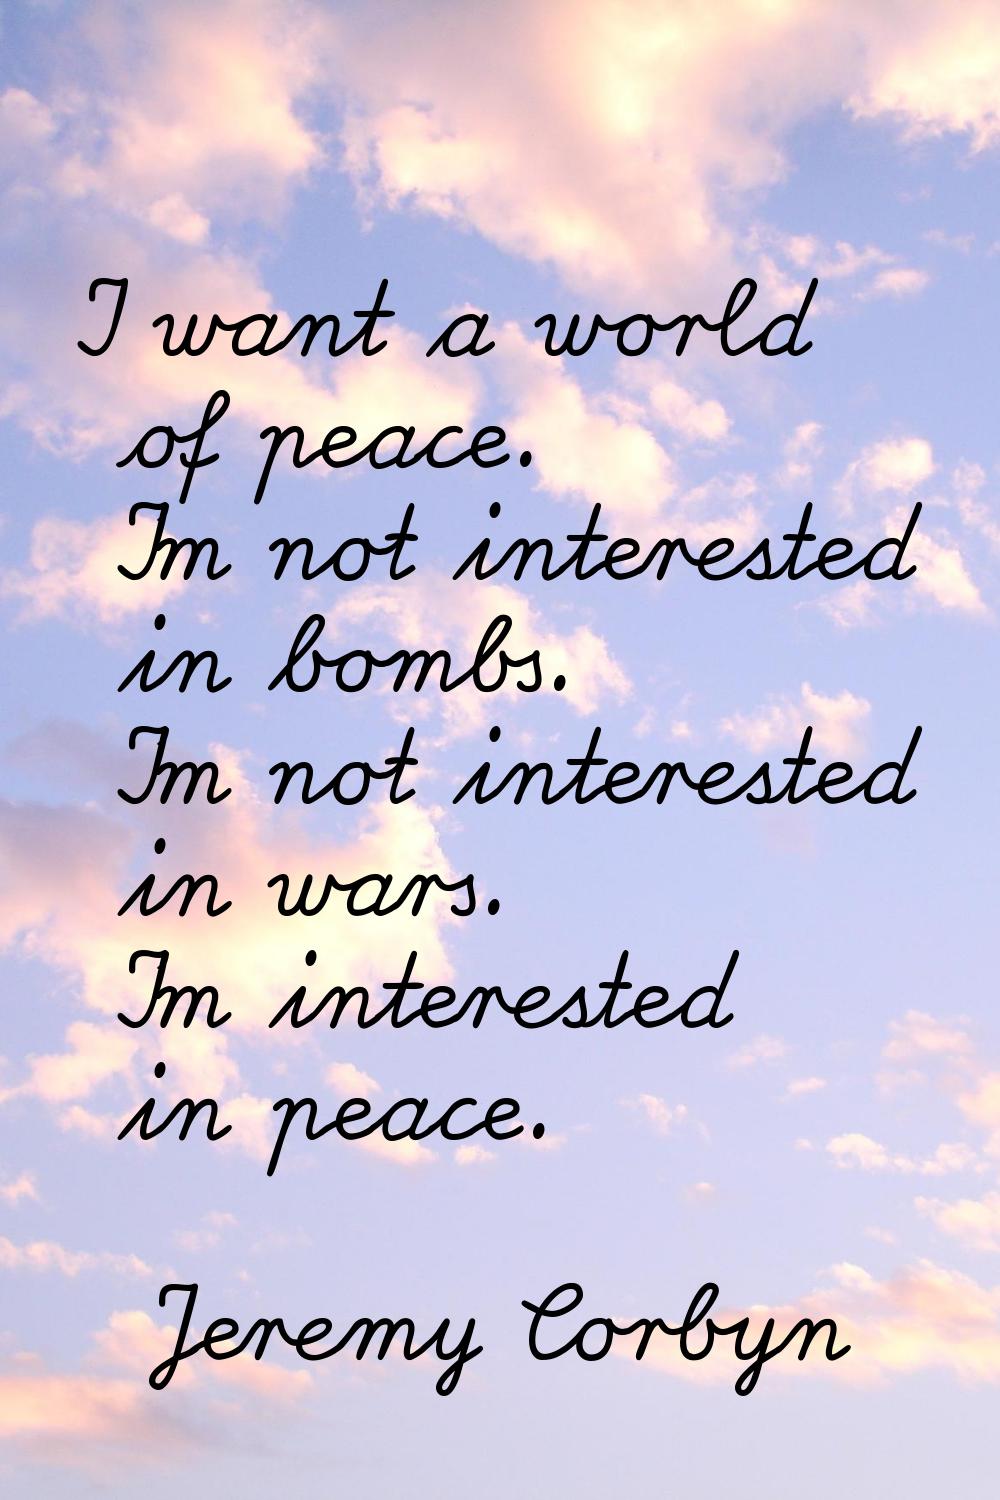 I want a world of peace. I'm not interested in bombs. I'm not interested in wars. I'm interested in